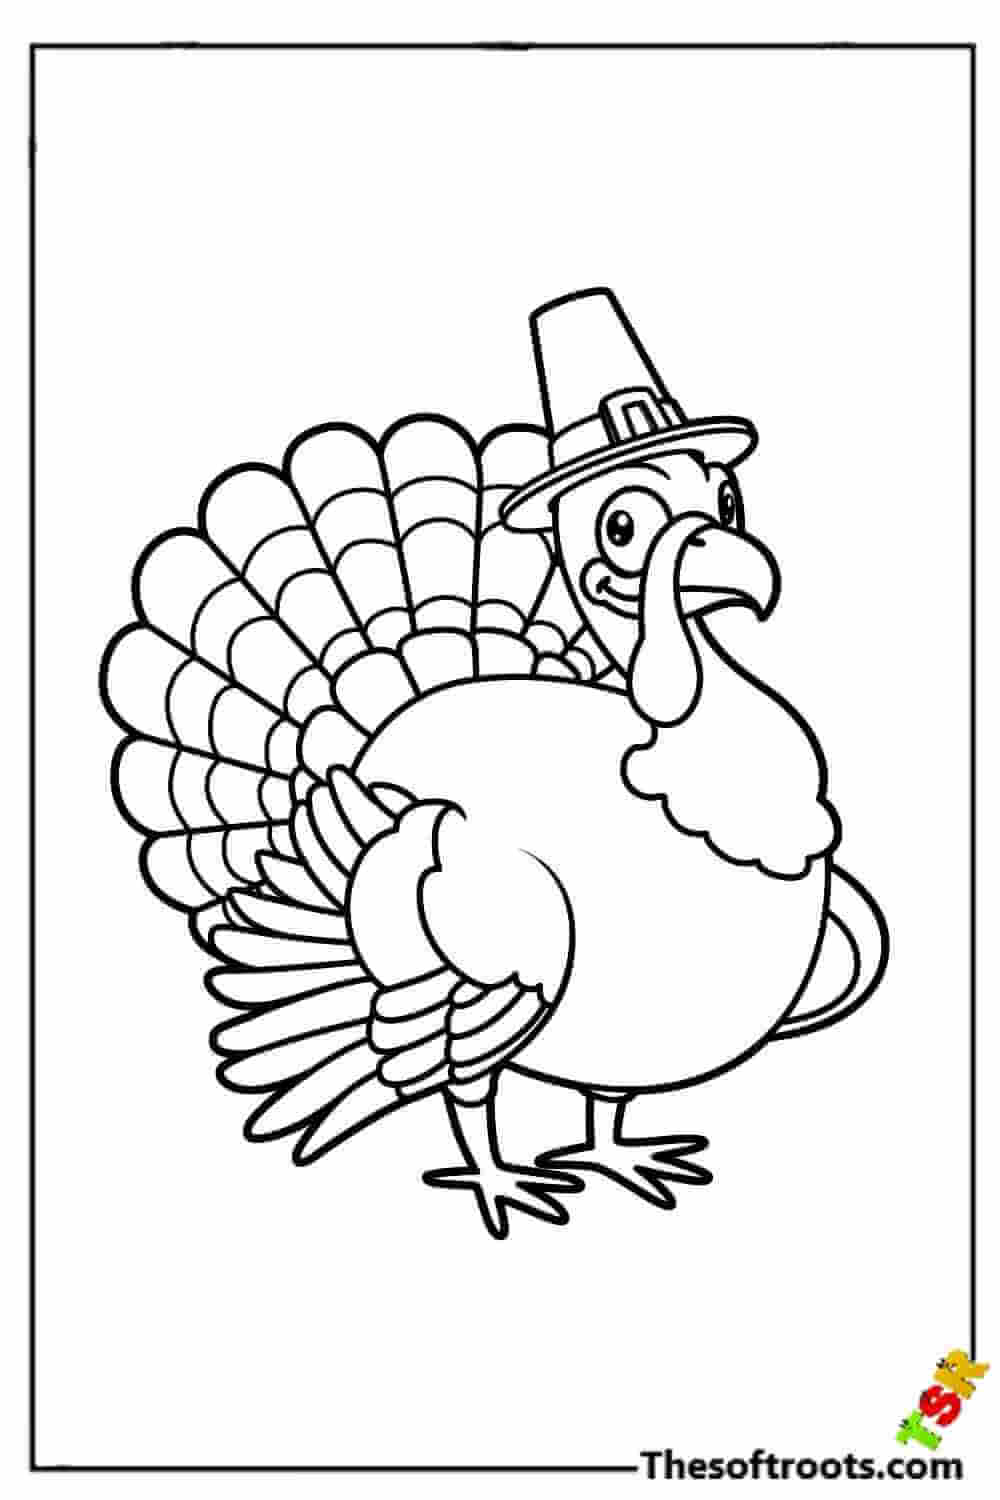 Turkey wearing hat coloring pages